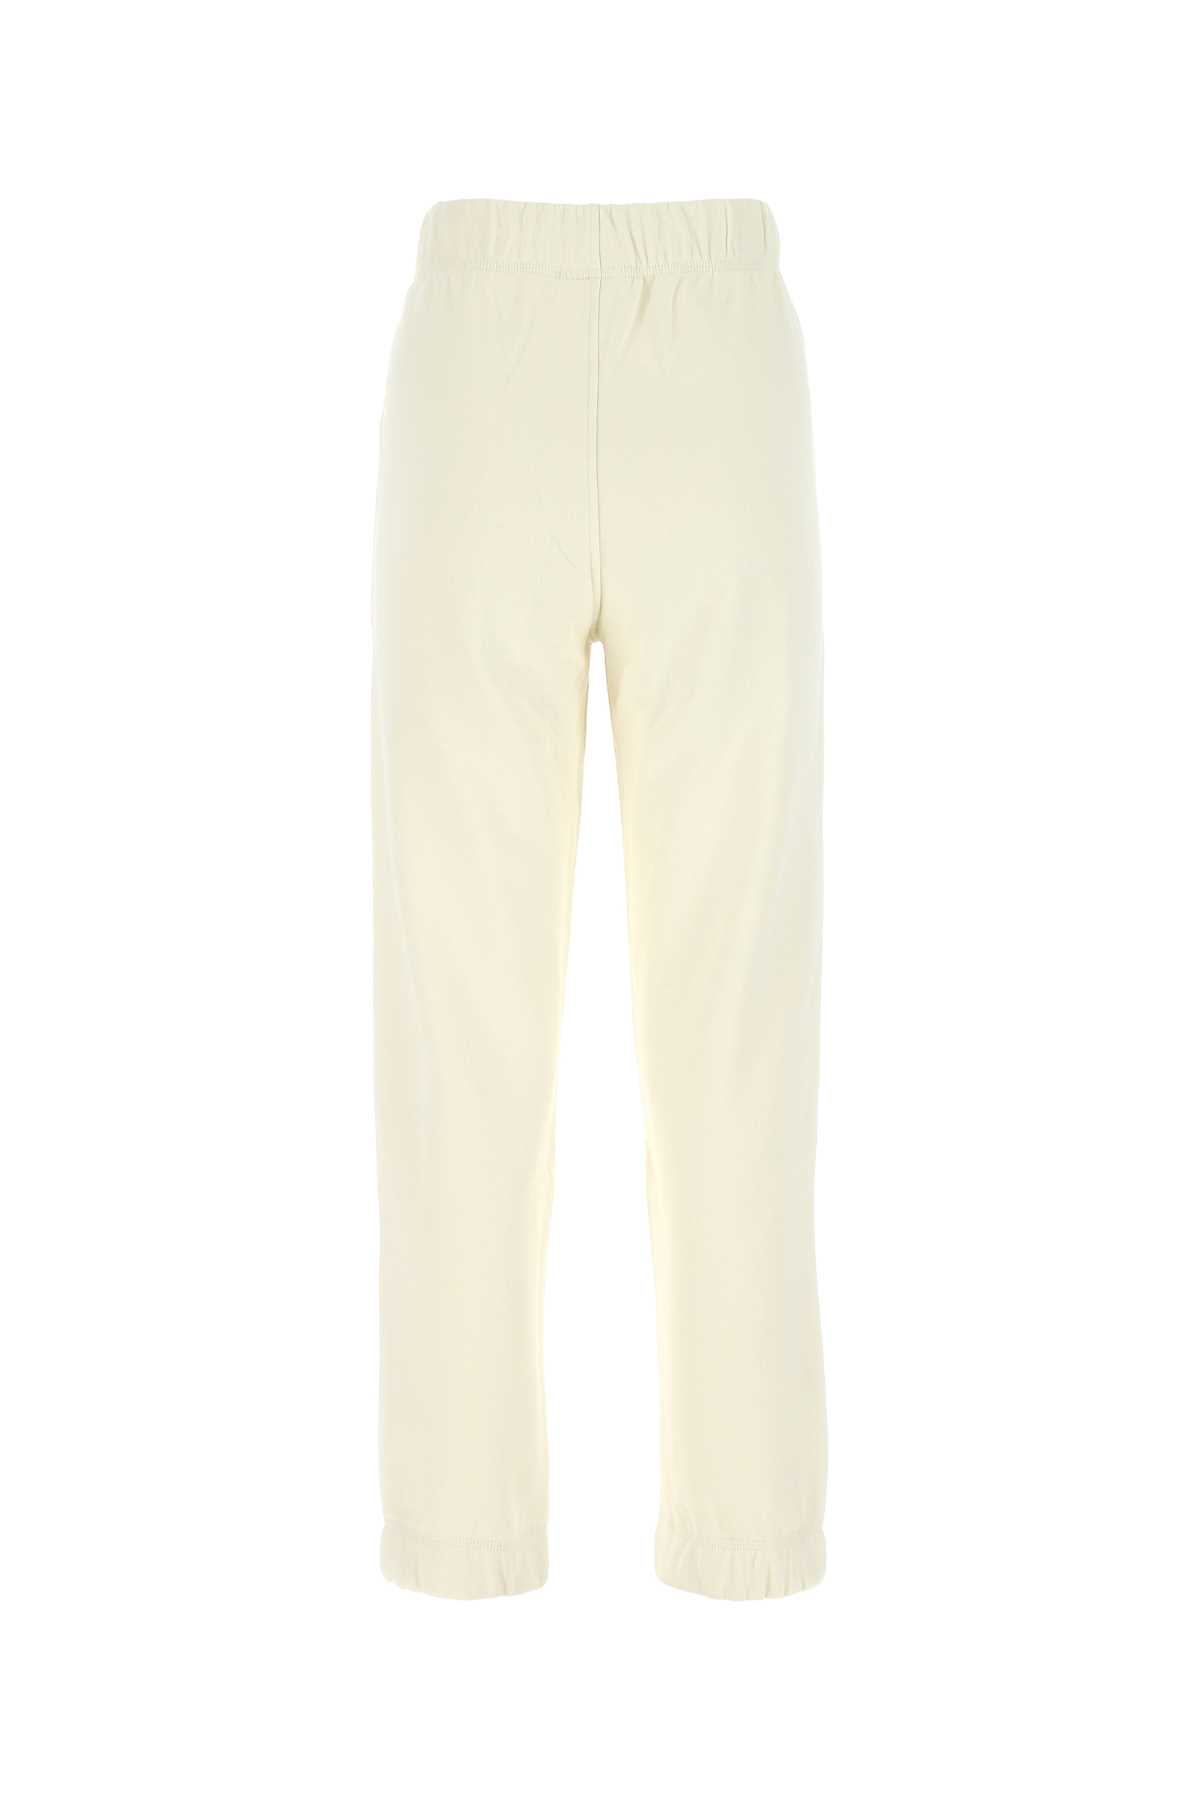 Ganni Ivory Cotton Blend Joggers In 135